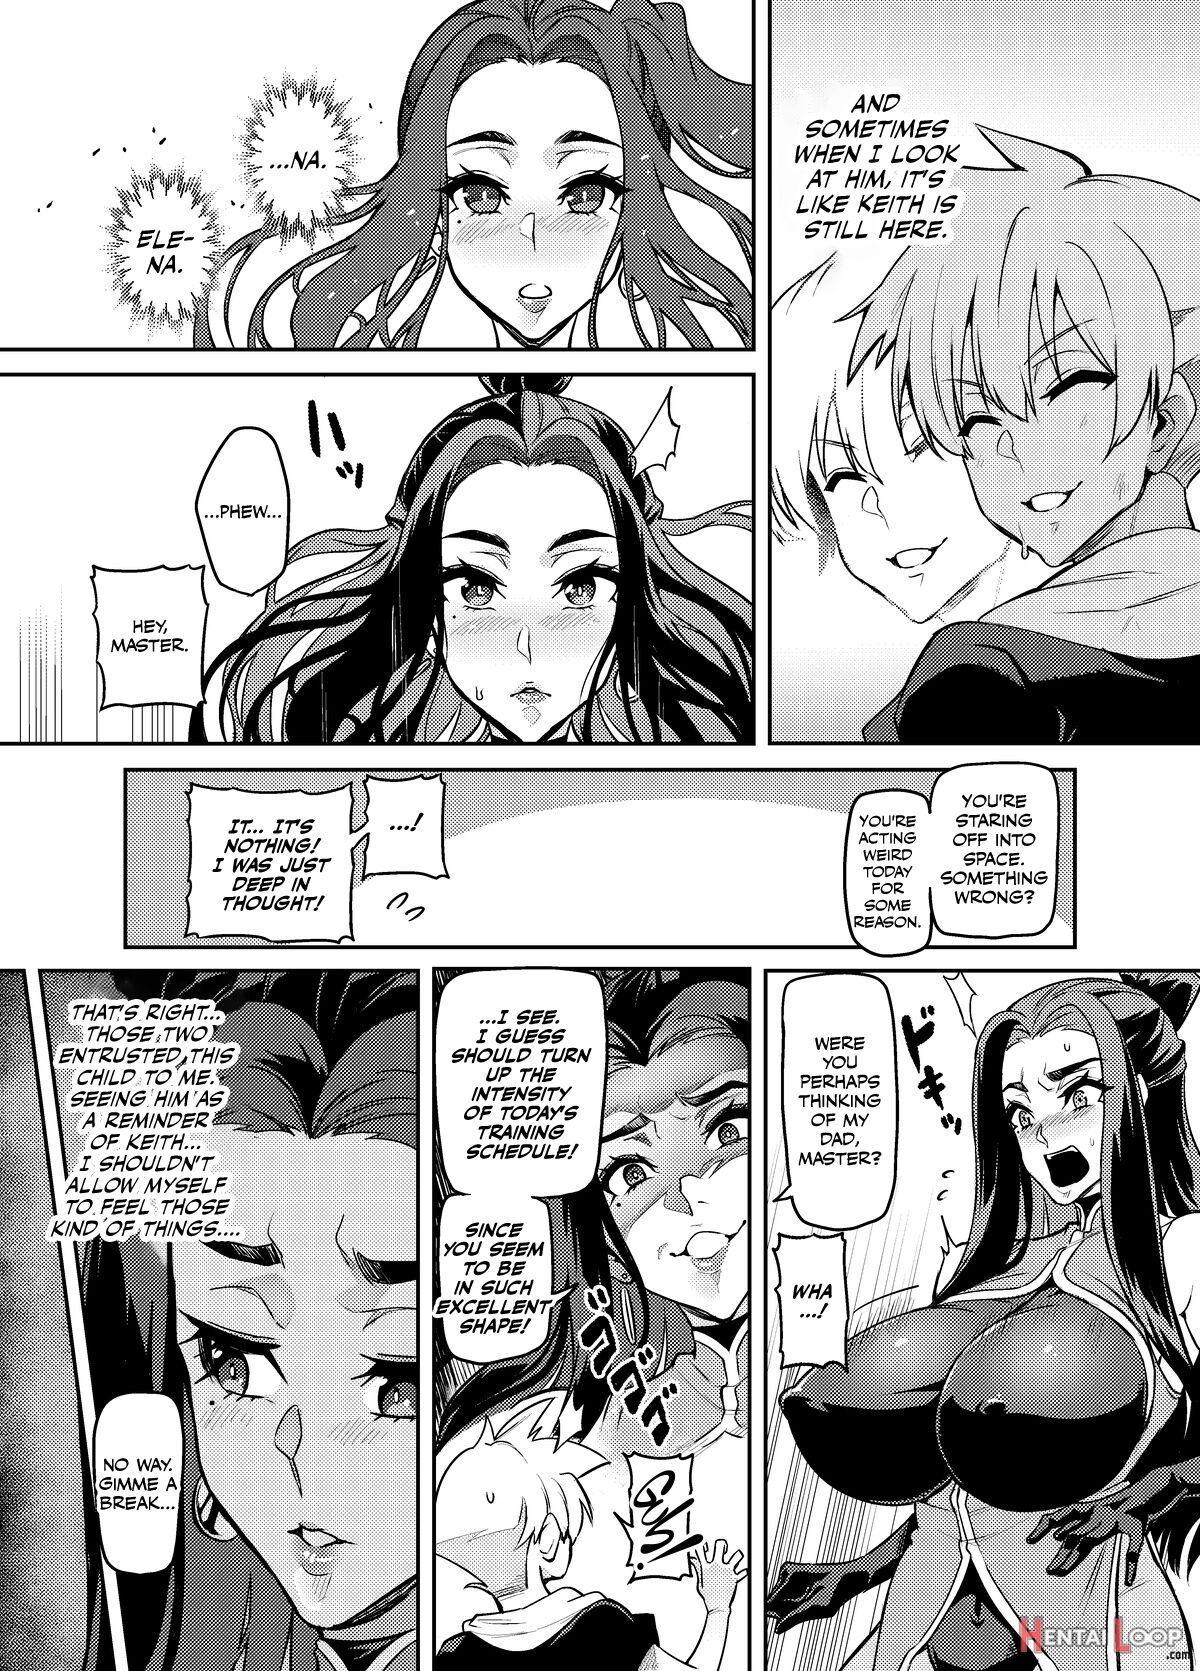 High Wizard Elena ~the Witch Who Fell In Love With The Child Entrusted To Her By Her Past Sweetheart~ Chapter 1-13, Ex page 5